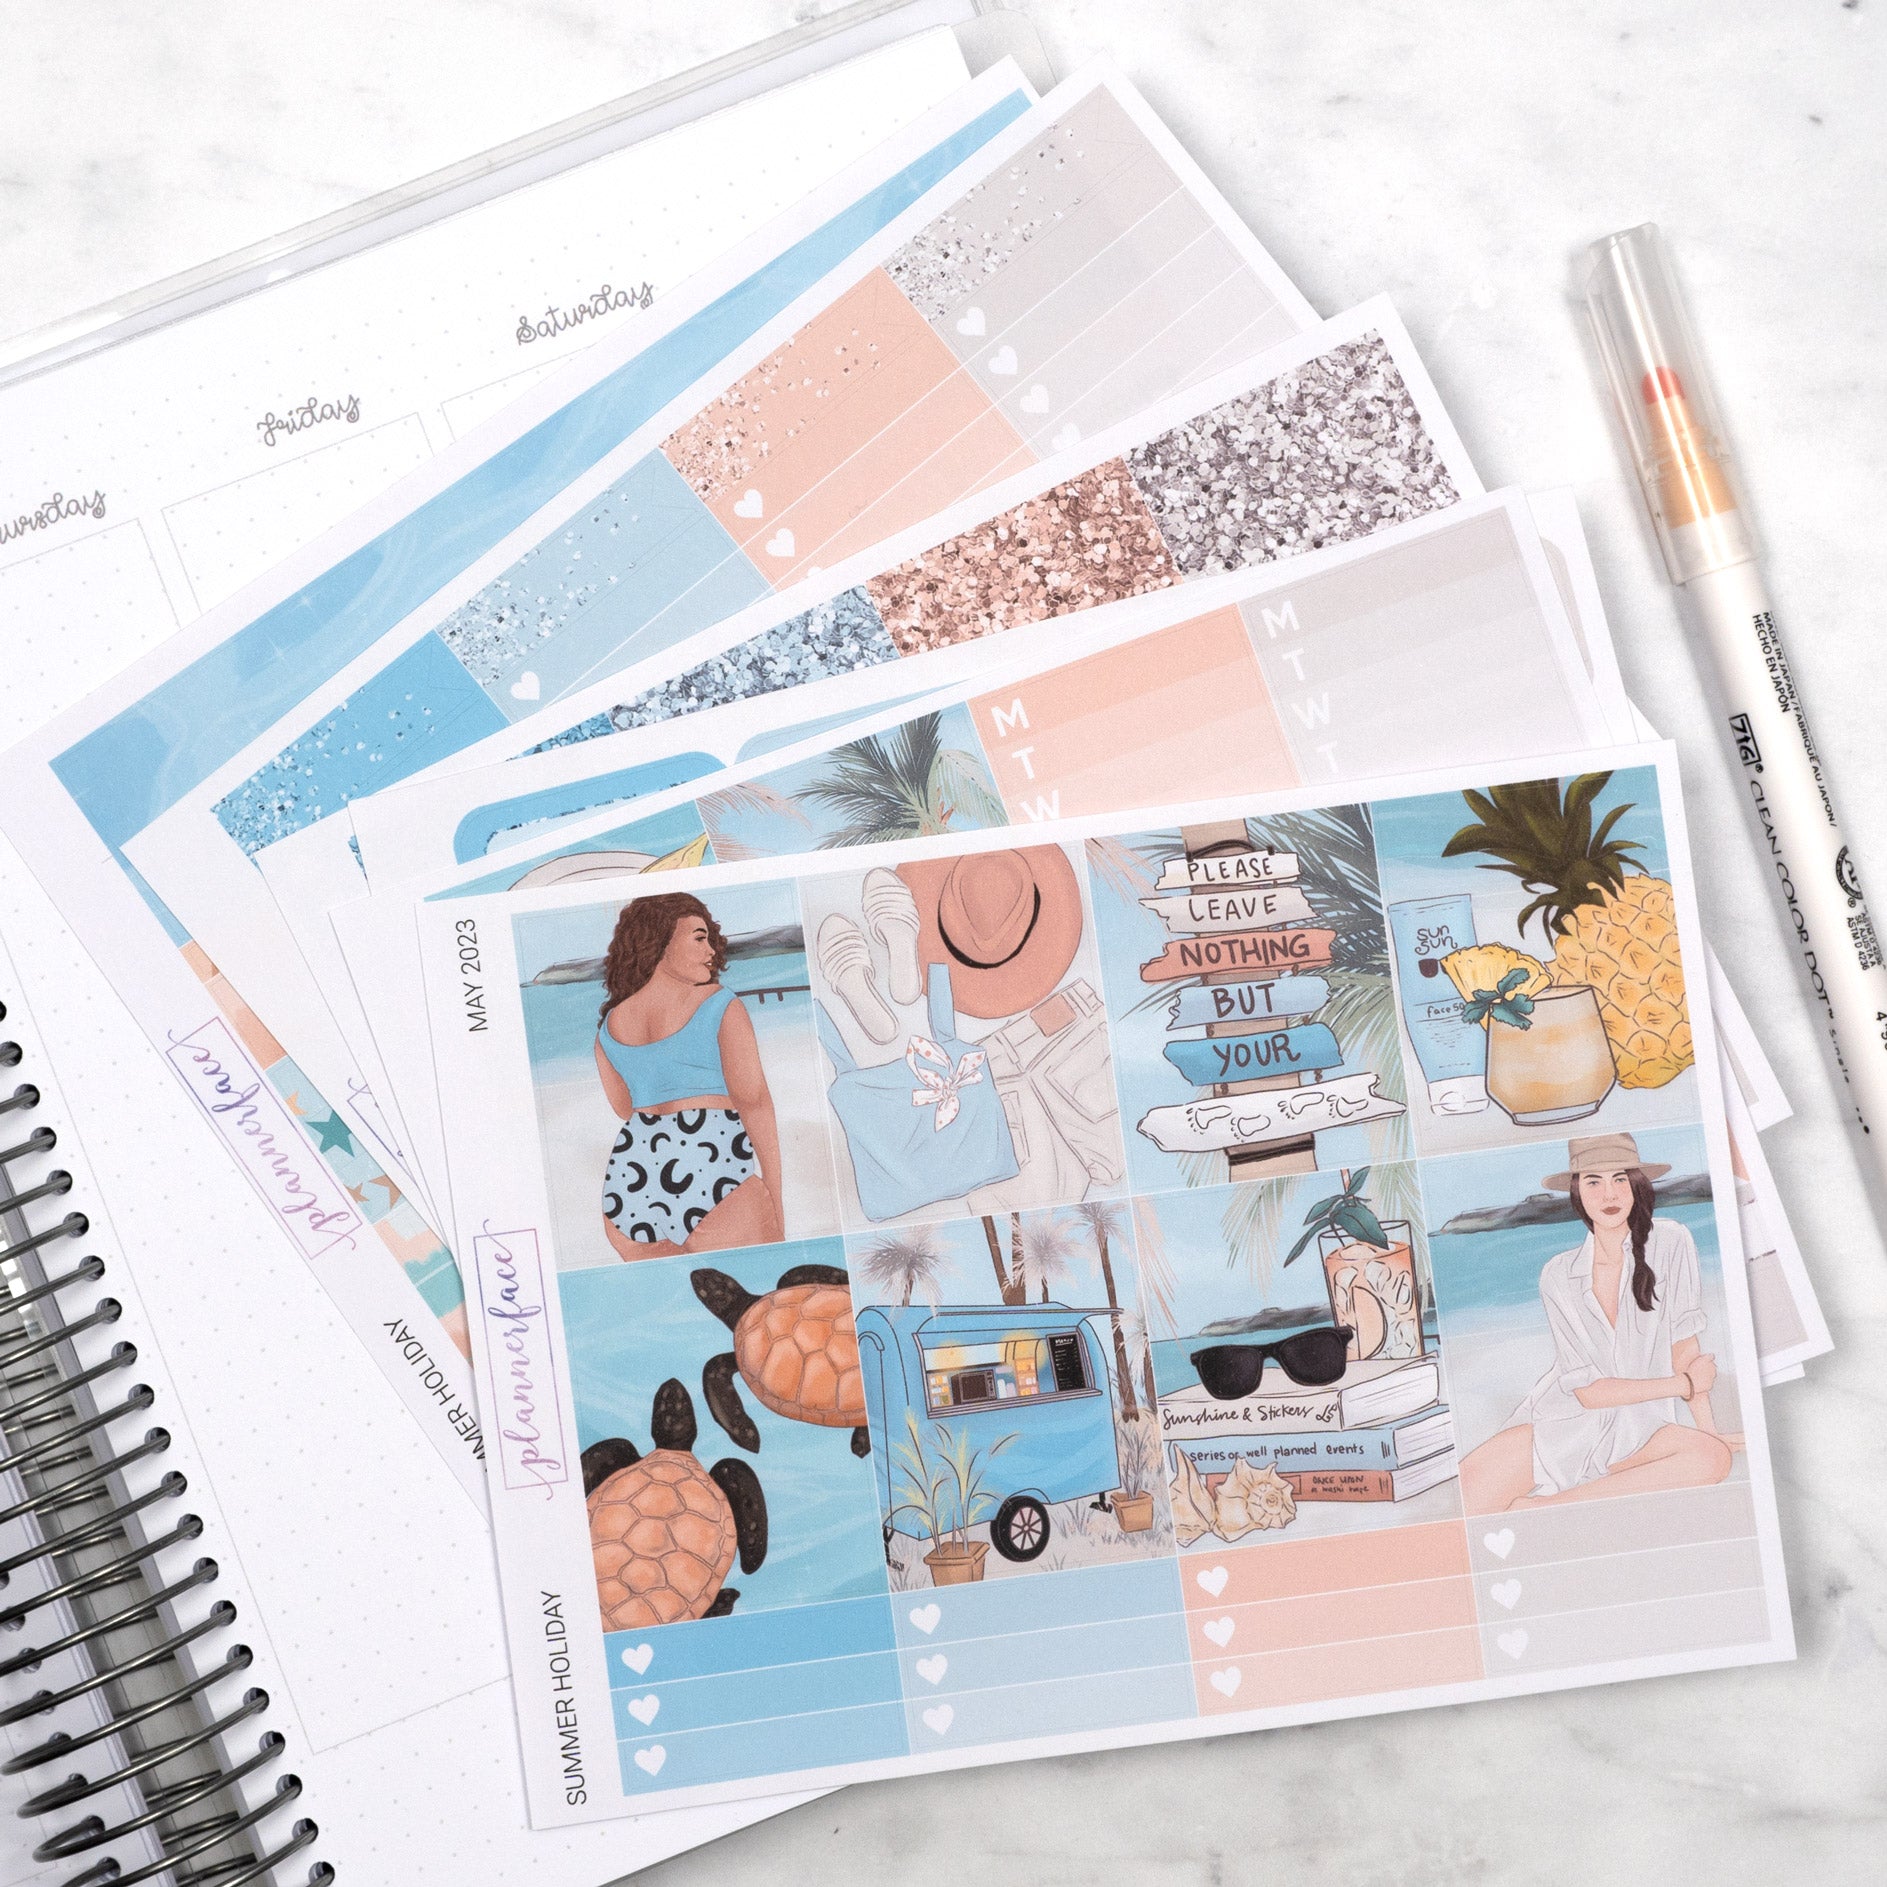 Summer Holiday Weekly Sticker Kit